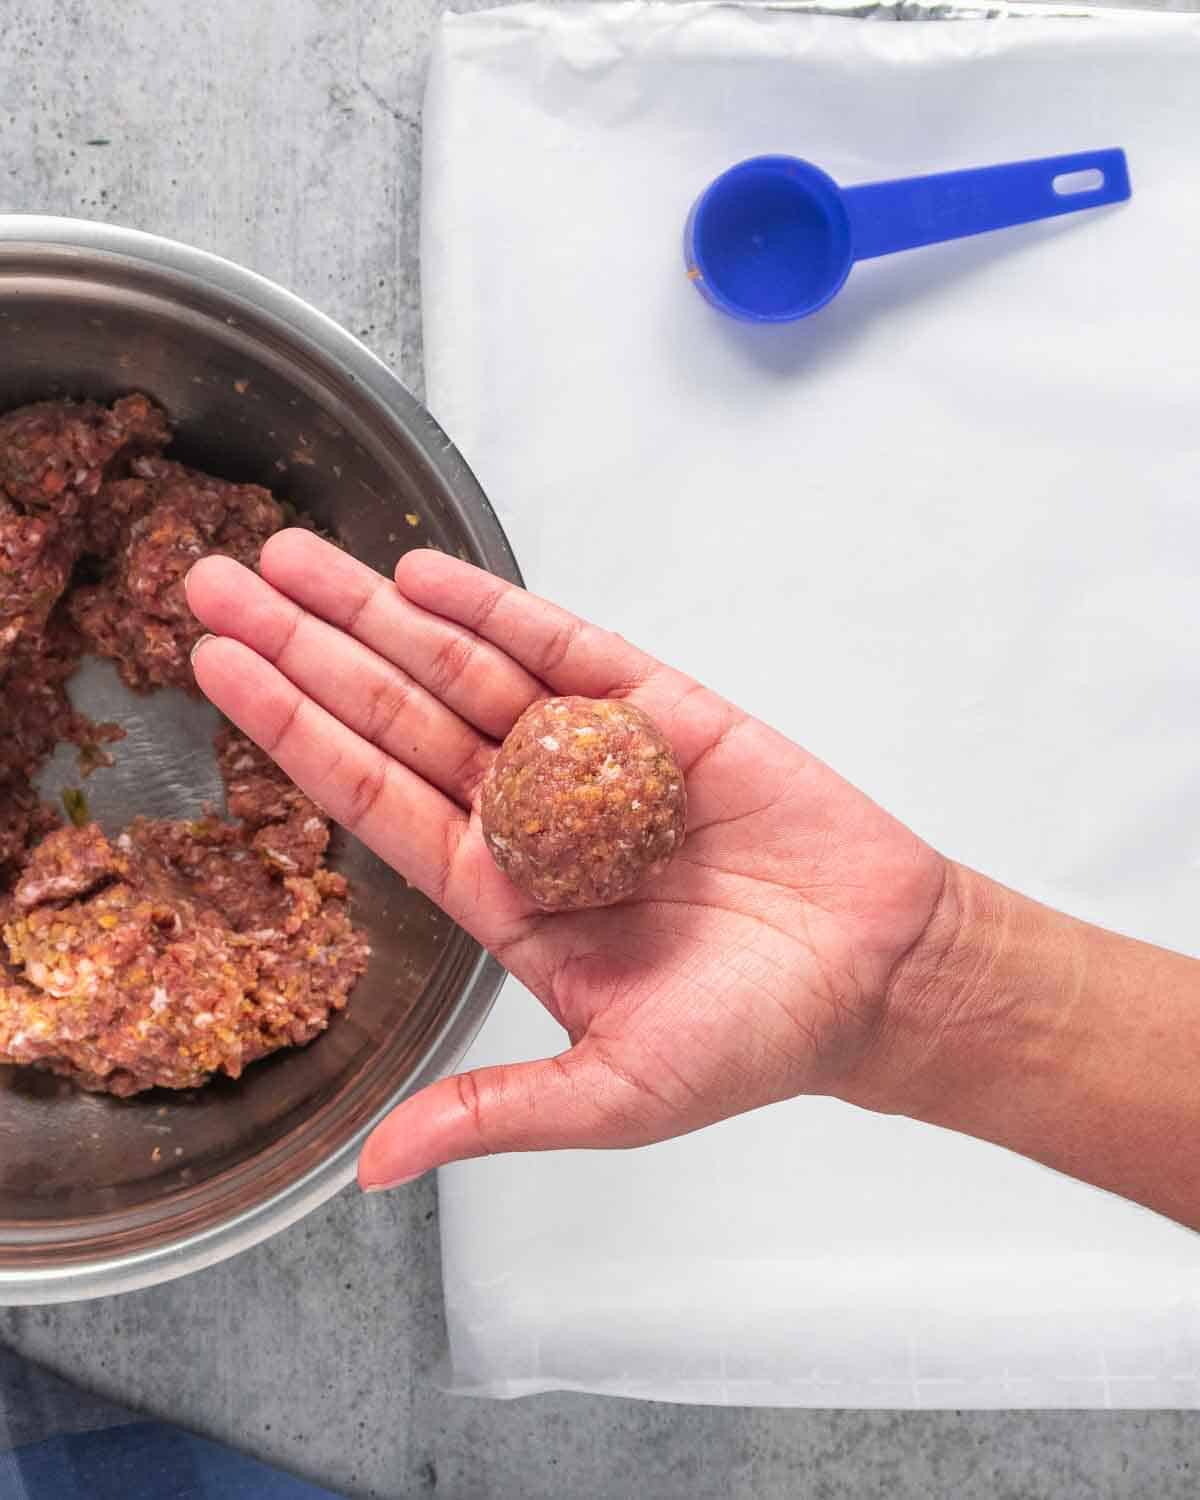 Formed meatballs on a woman's hand.